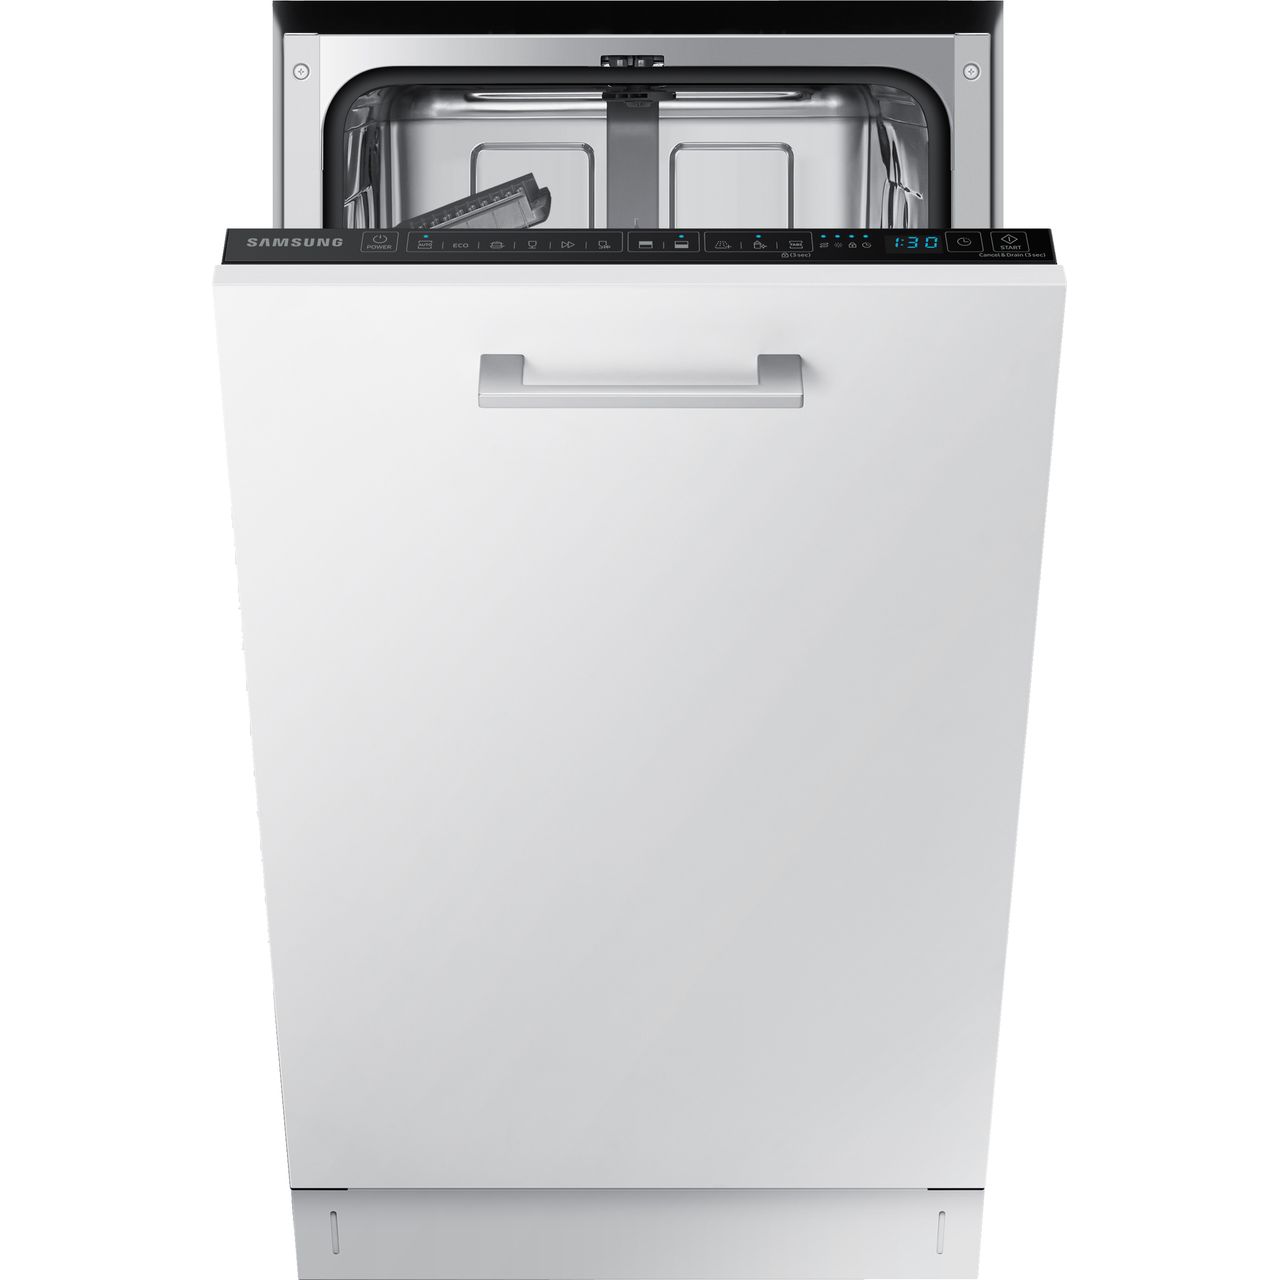 Samsung DW50R4060BB Fully Integrated Slimline Dishwasher Review